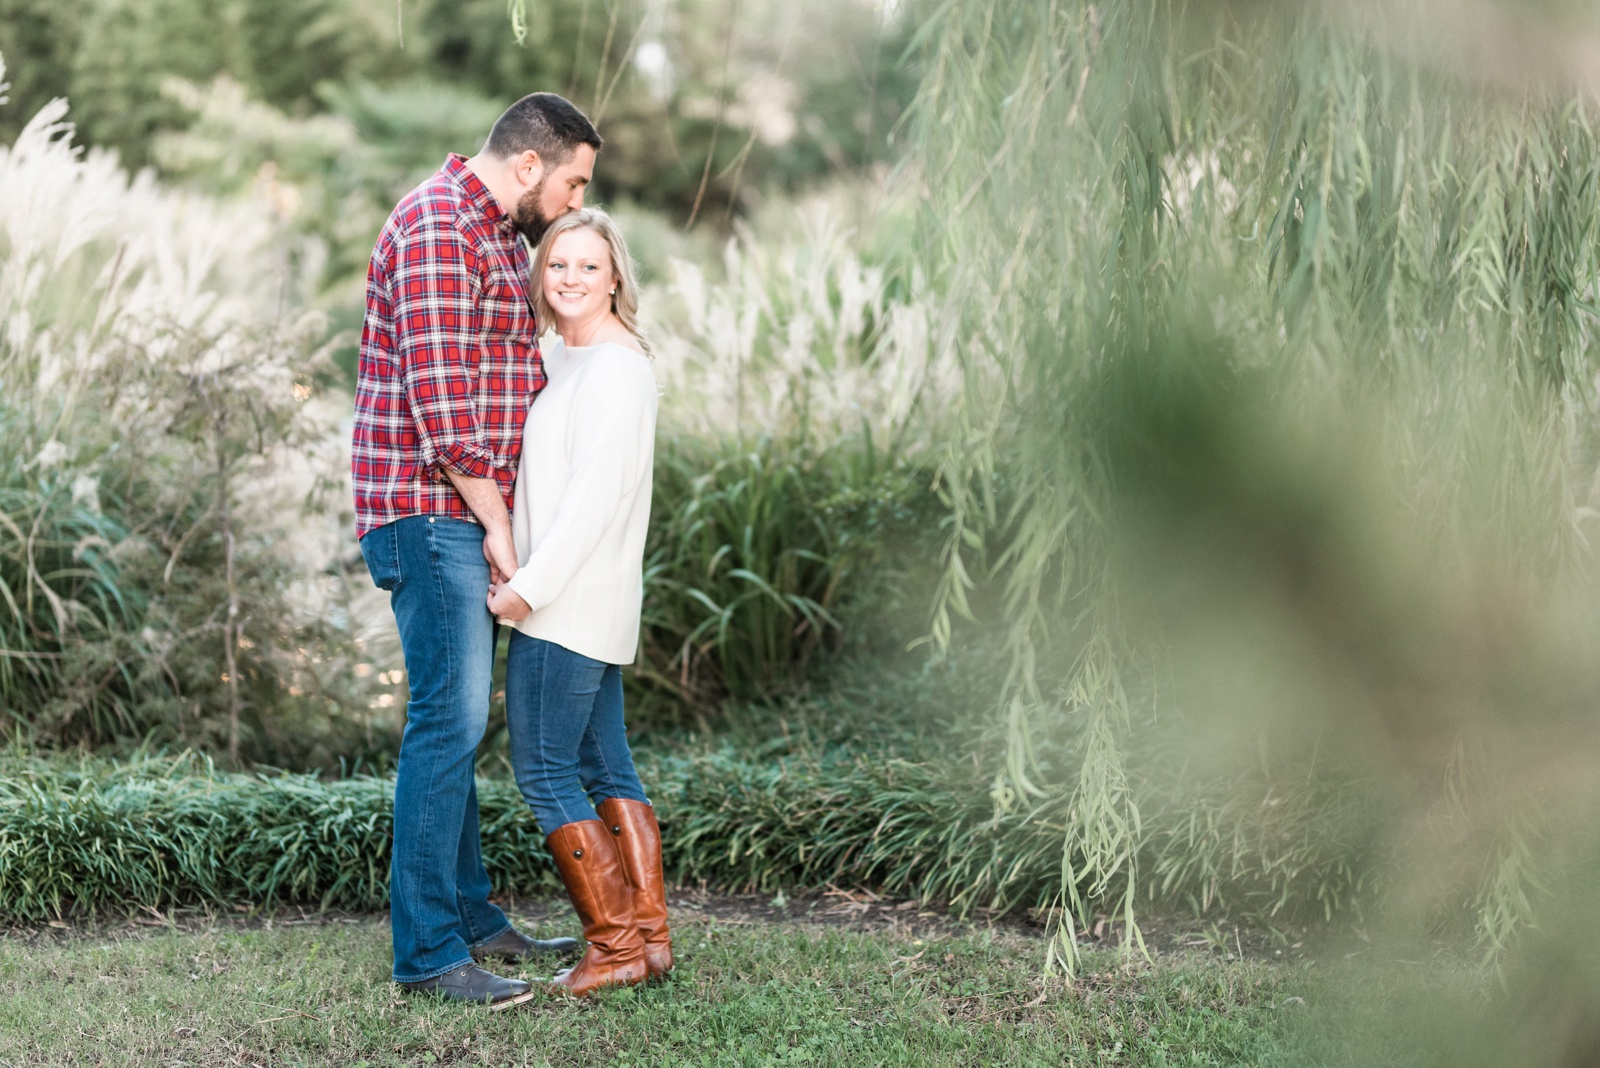 downtown-norfolk-virginia-fall-engagement-session-photo_2321.jpg